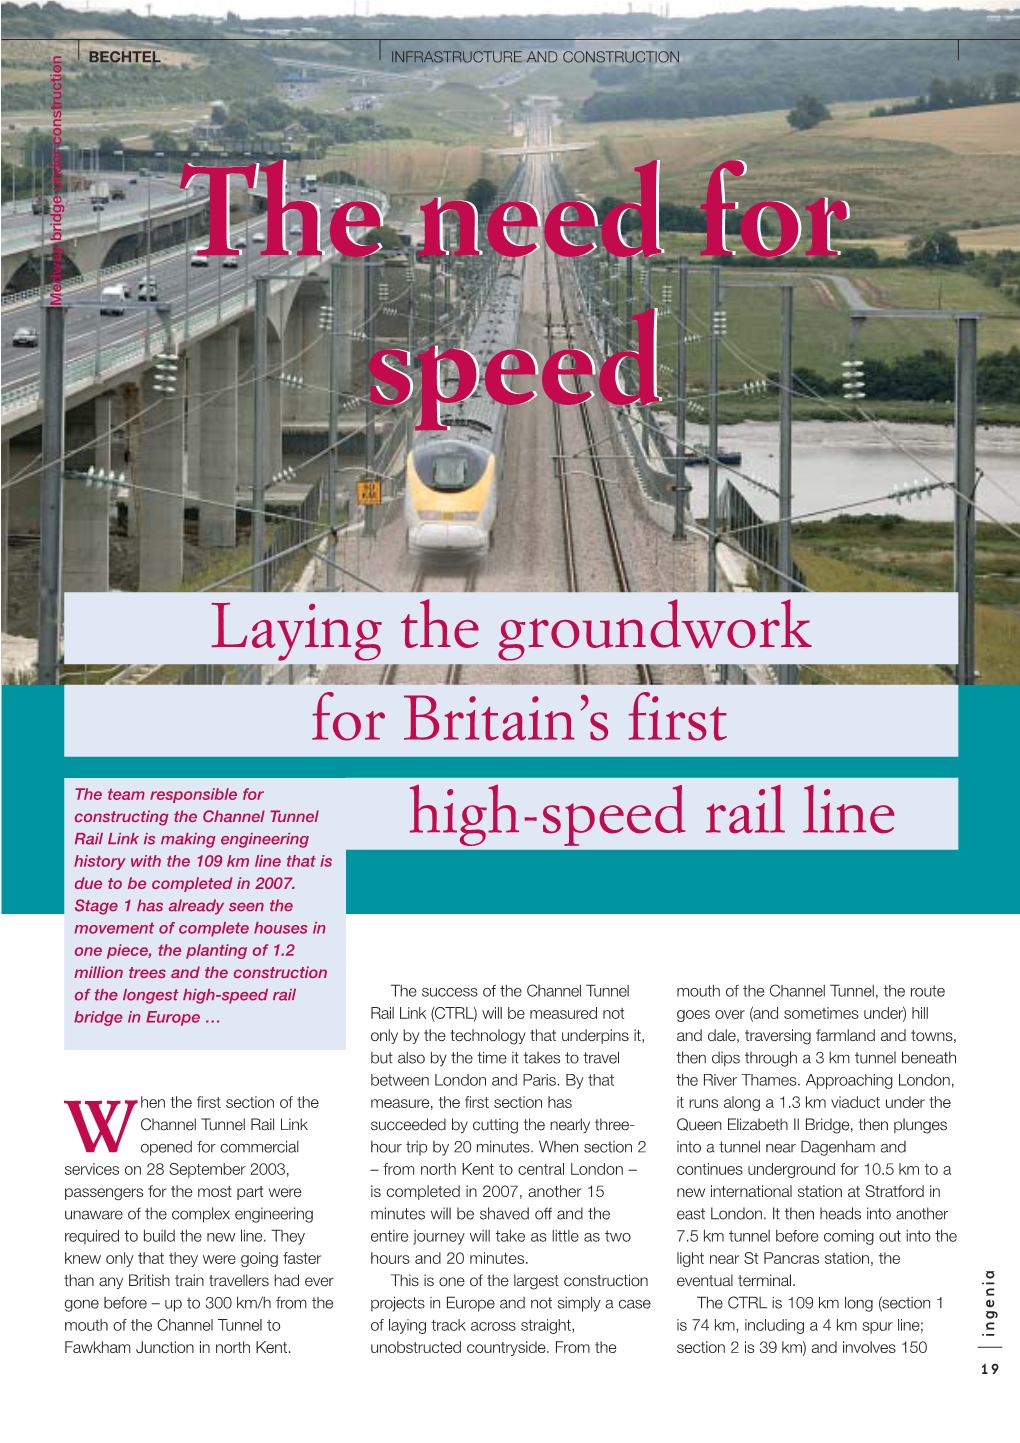 Laying the Groundwork for Britain's First High-Speed Rail Line